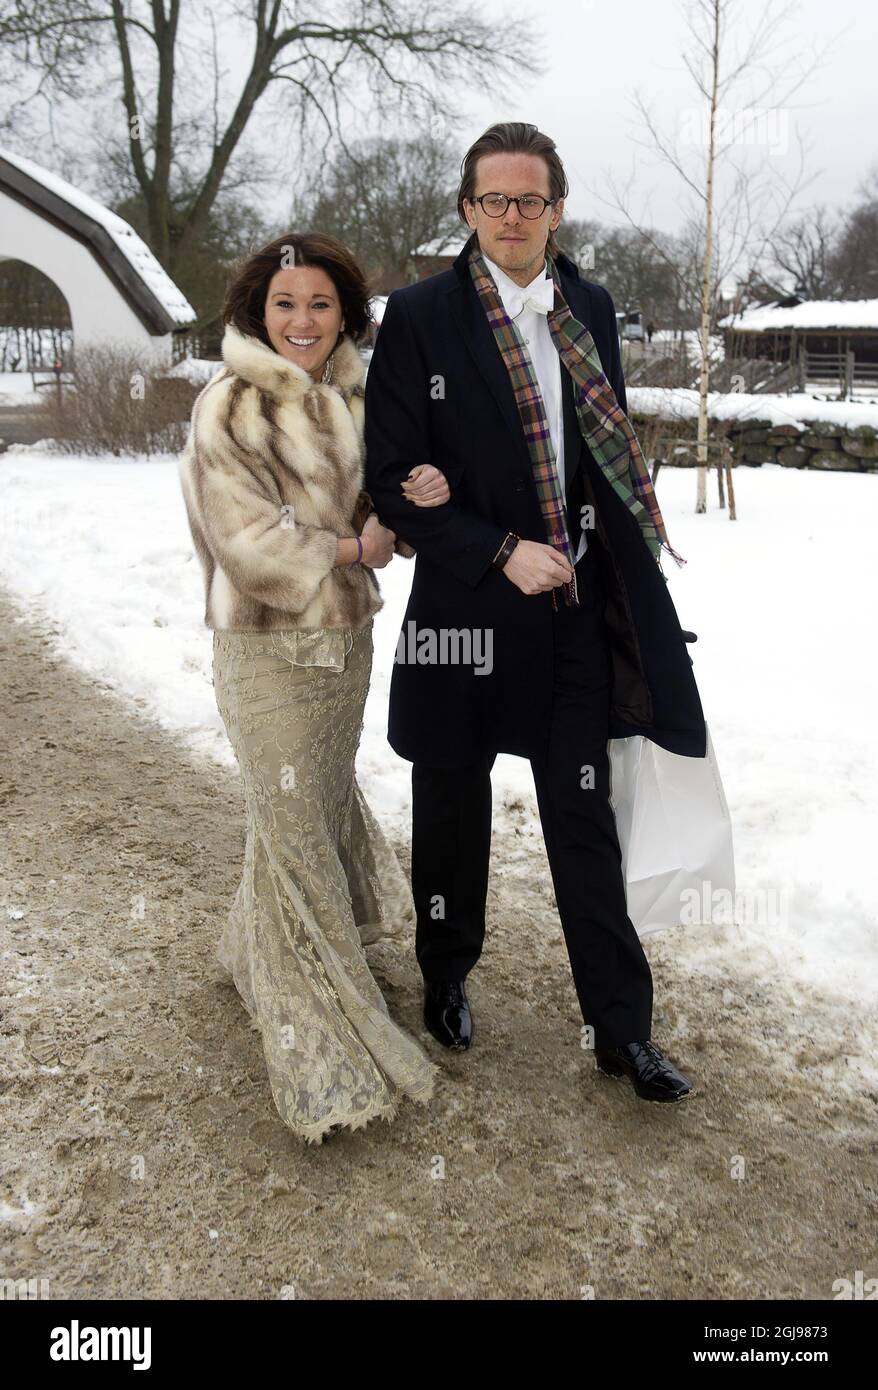 STOCKHOLM 2012-02-19 Emma Pernald, former finacee of Prince Carl Philip, and her boyfriend Tomas Jonson at the wedding of Robin af ByrÃ©n and Tin-Tin RosÃ©n in Seglora Church at in Stockholm, Sweden, February 18, 2012. Foto: Stefan Soderstrom / XP / SCANPIX / kod 7120 ** OUT SWEDEN OUT **  Stock Photo